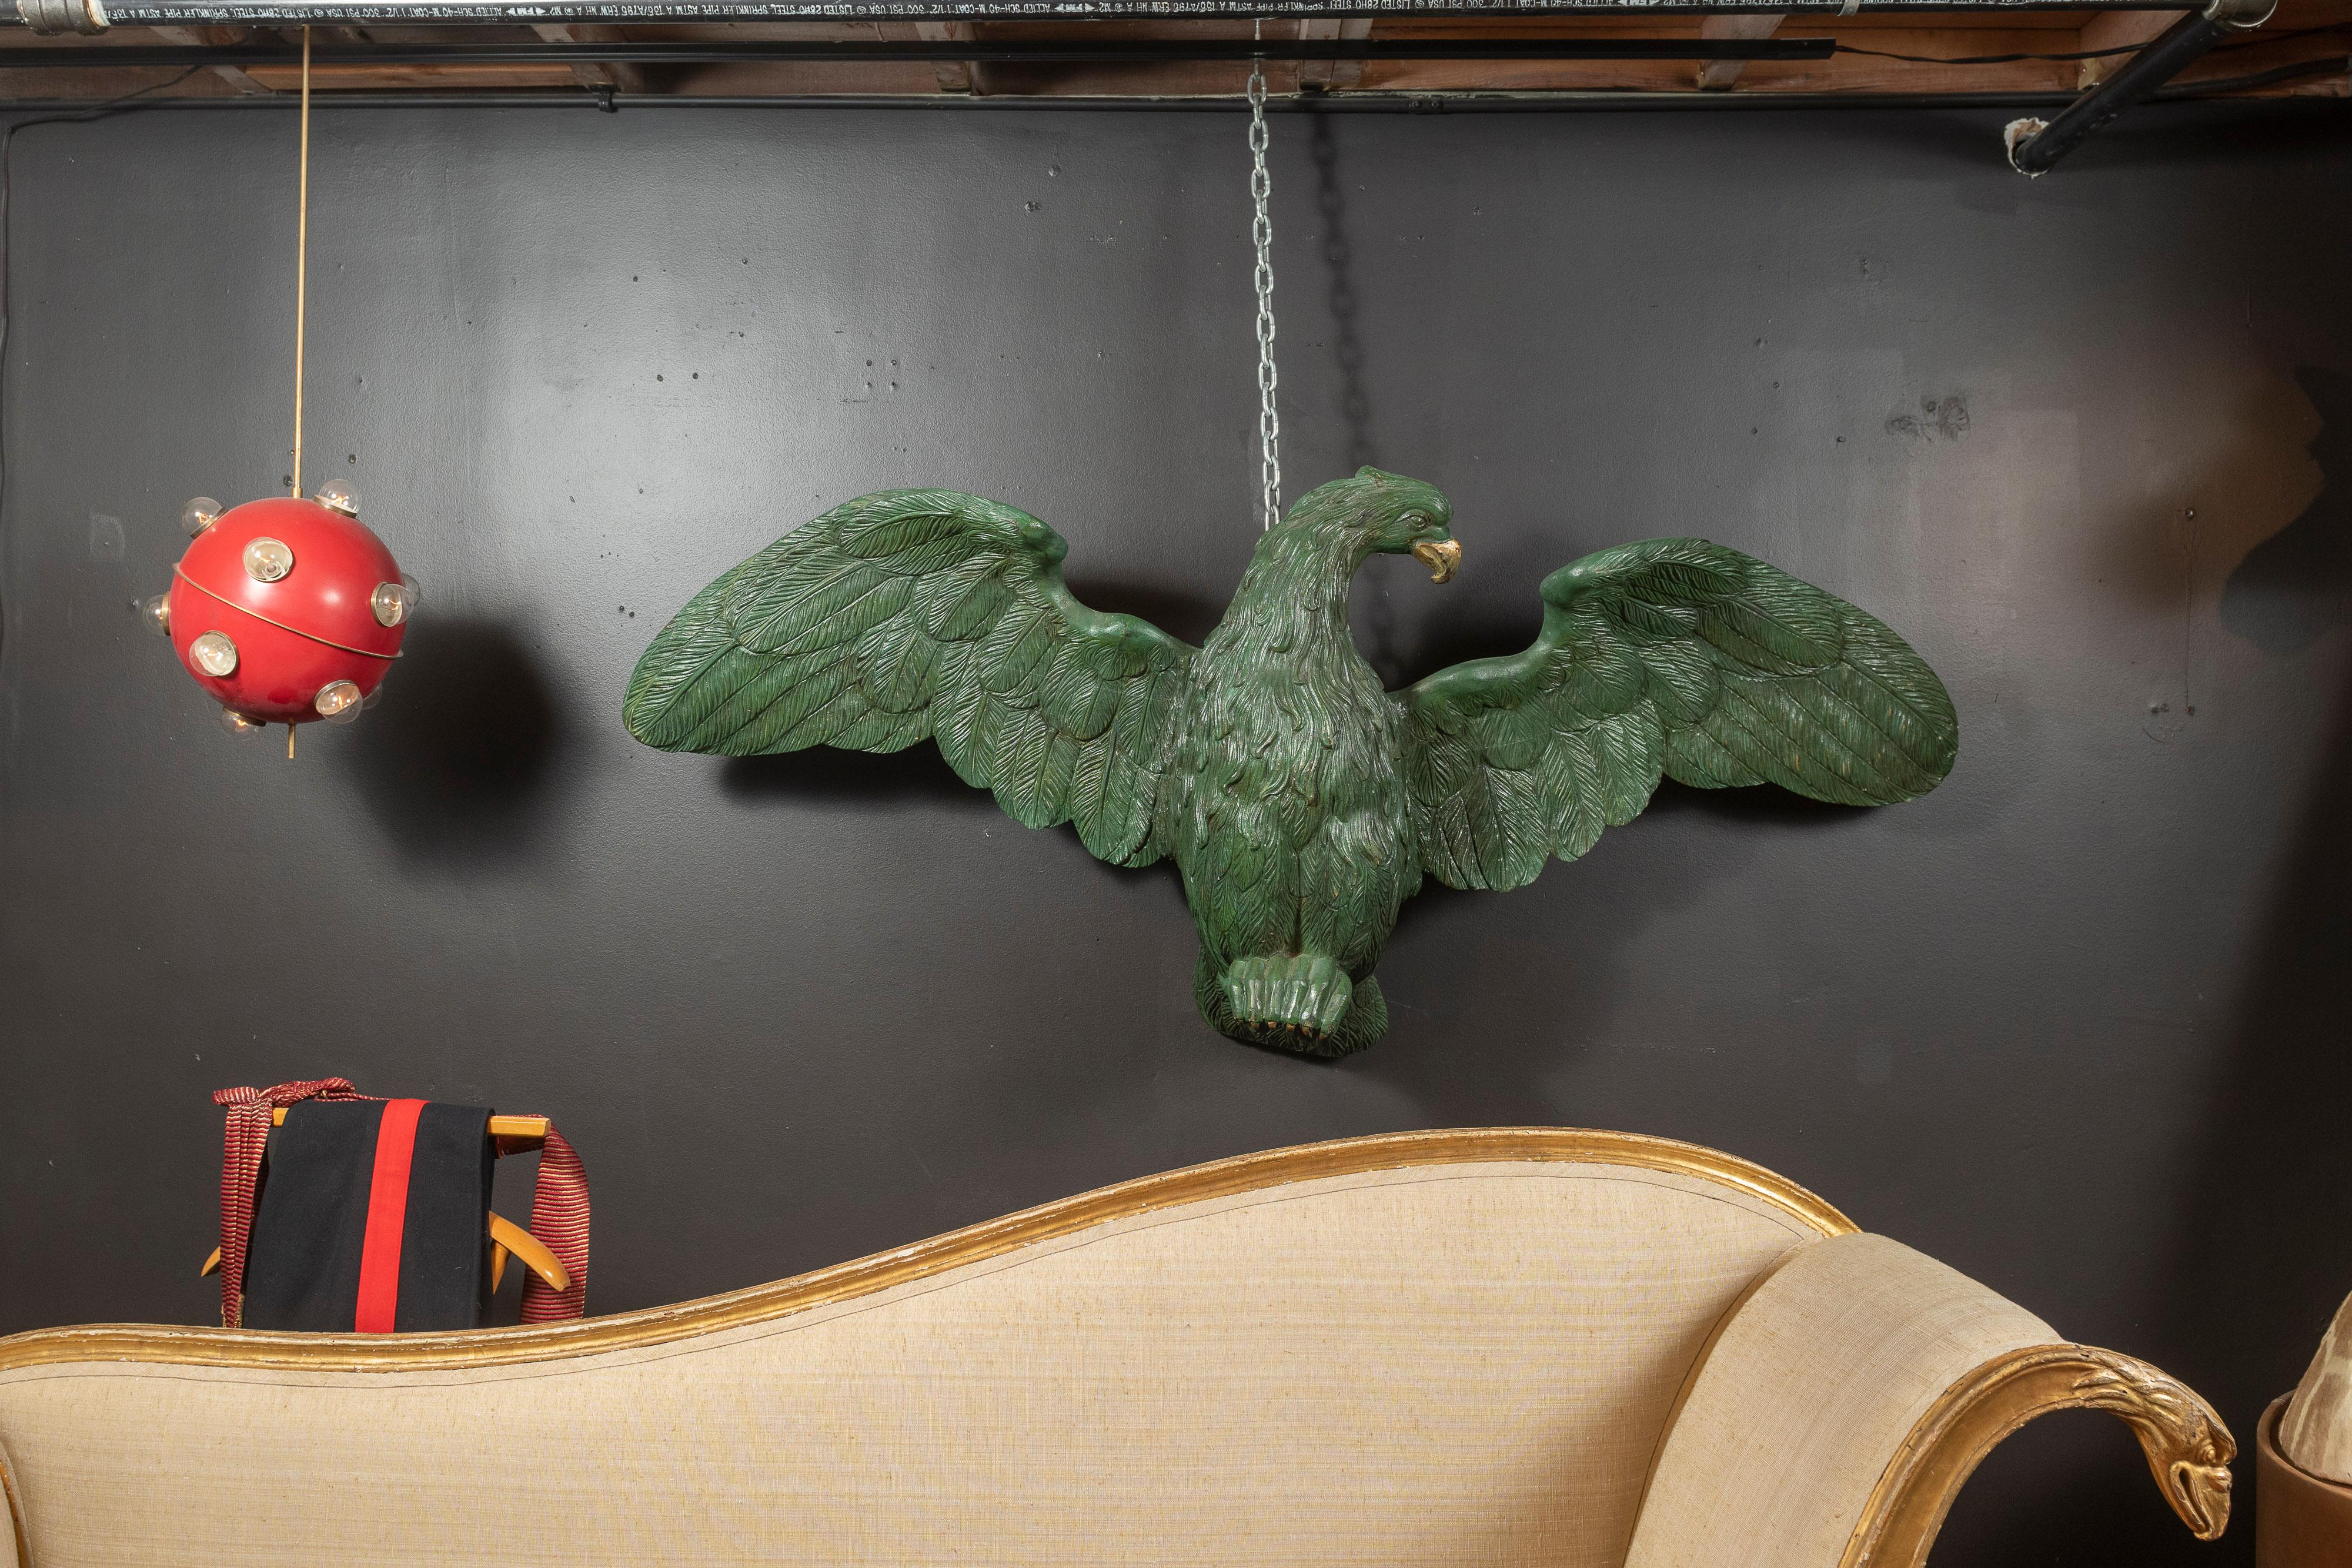 Antique carved wooden eagle painted green with gilded accents makes an impressive statement with its 69 inch wing span when hung in your home, office or business. The piece is in good condition considering its age and materials. The wings have been